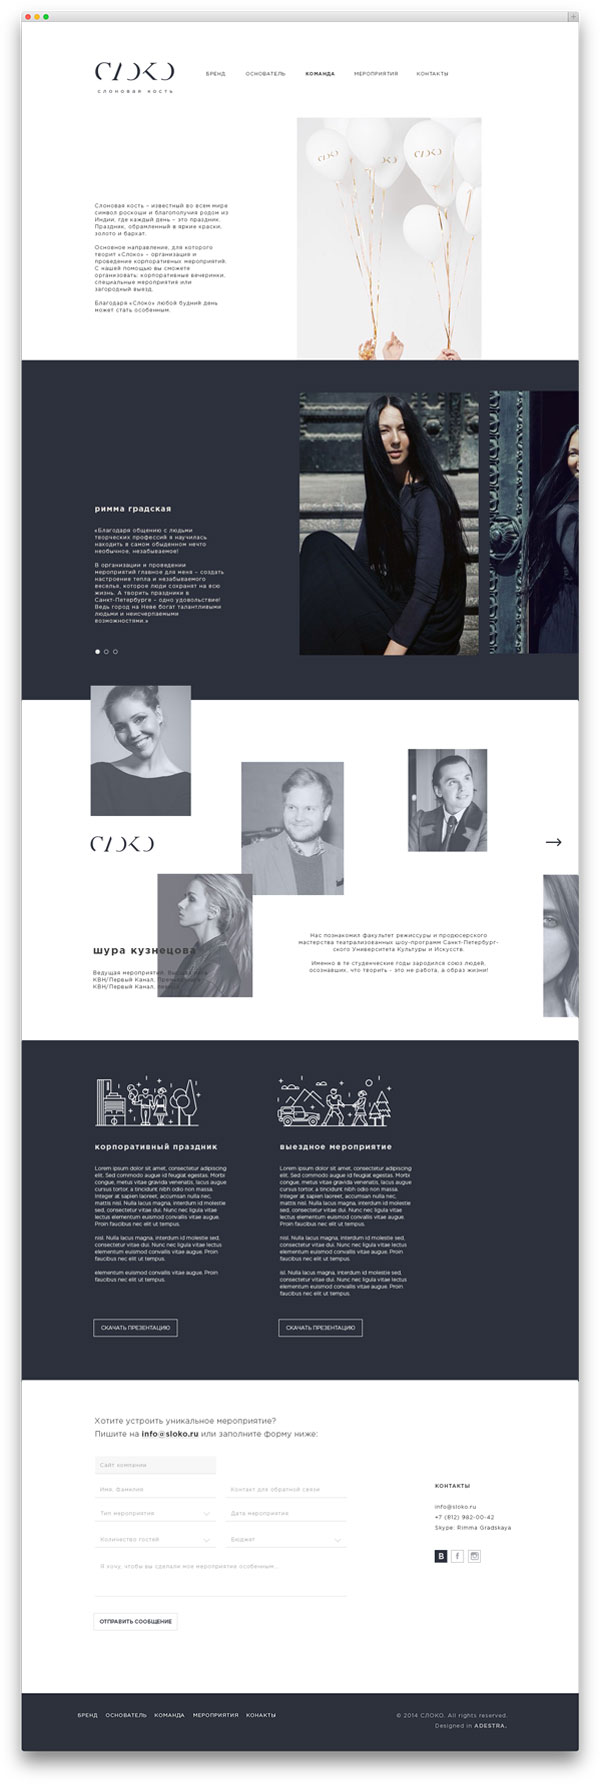 Web design by All Design Transparent (ADESTRA) for SLOKO, an event project based in Saint-Peterburg, Russia.